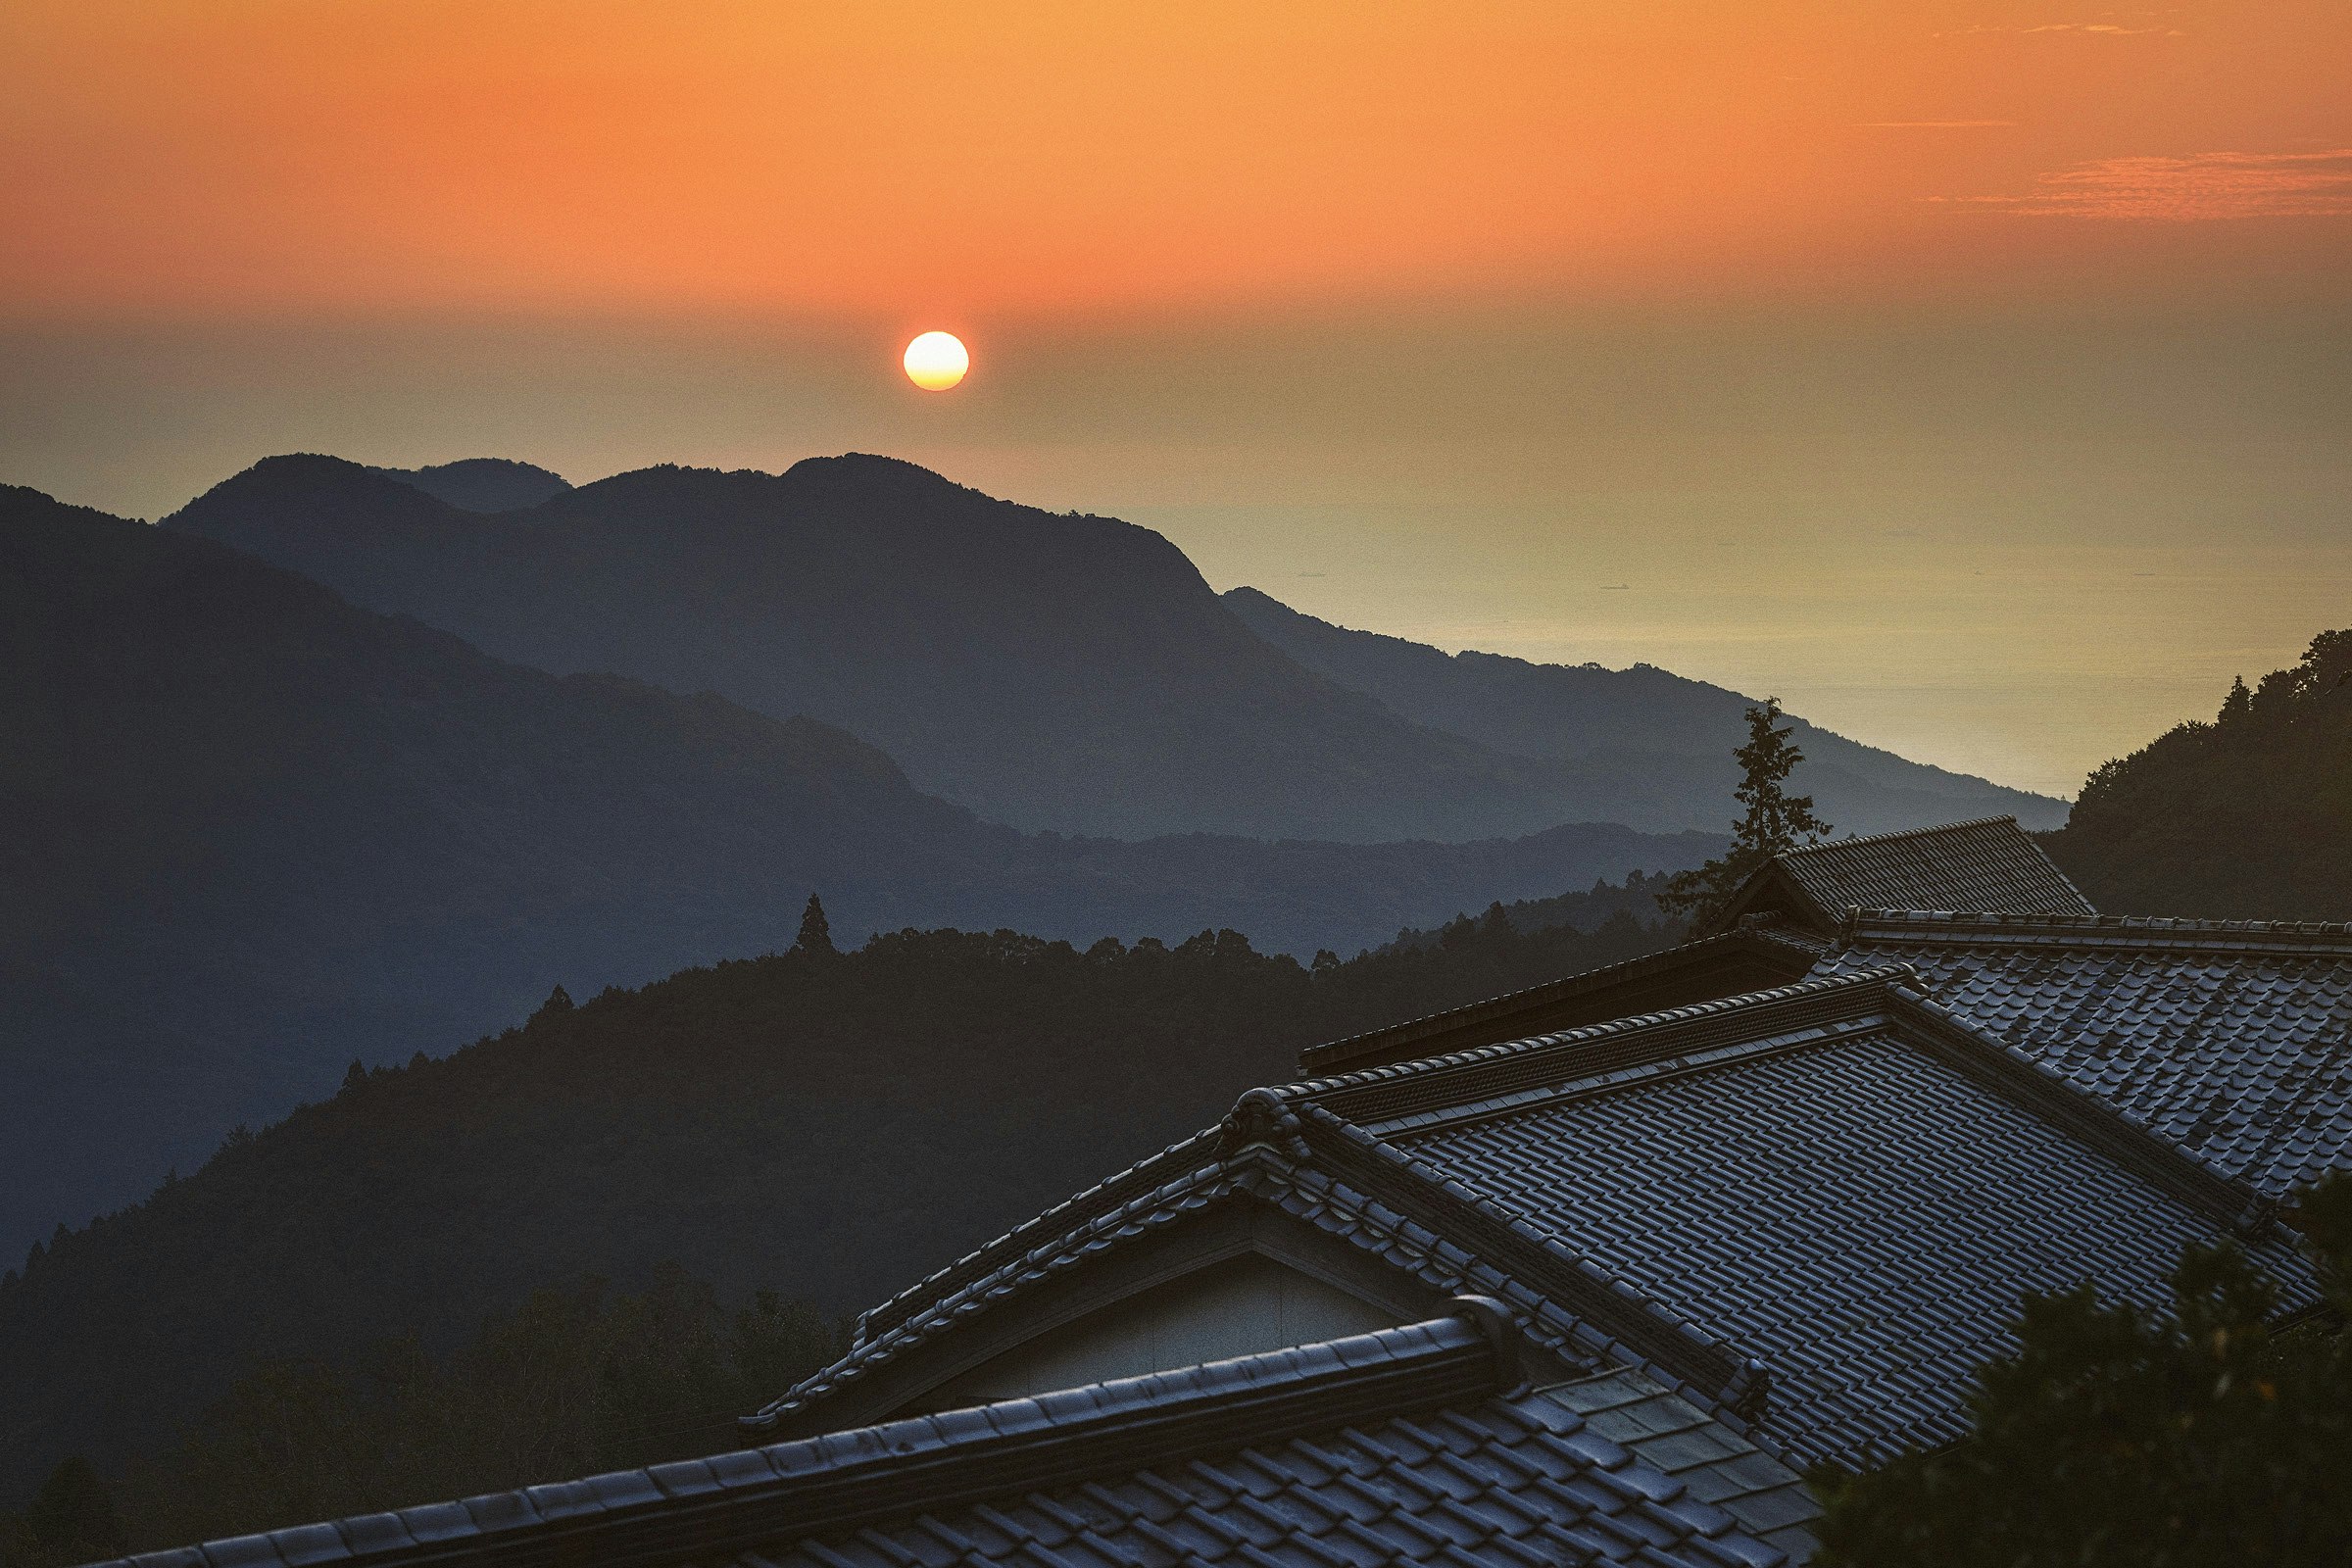 The sun rises over darkened mountains and the rooftops of Nachi Taisha